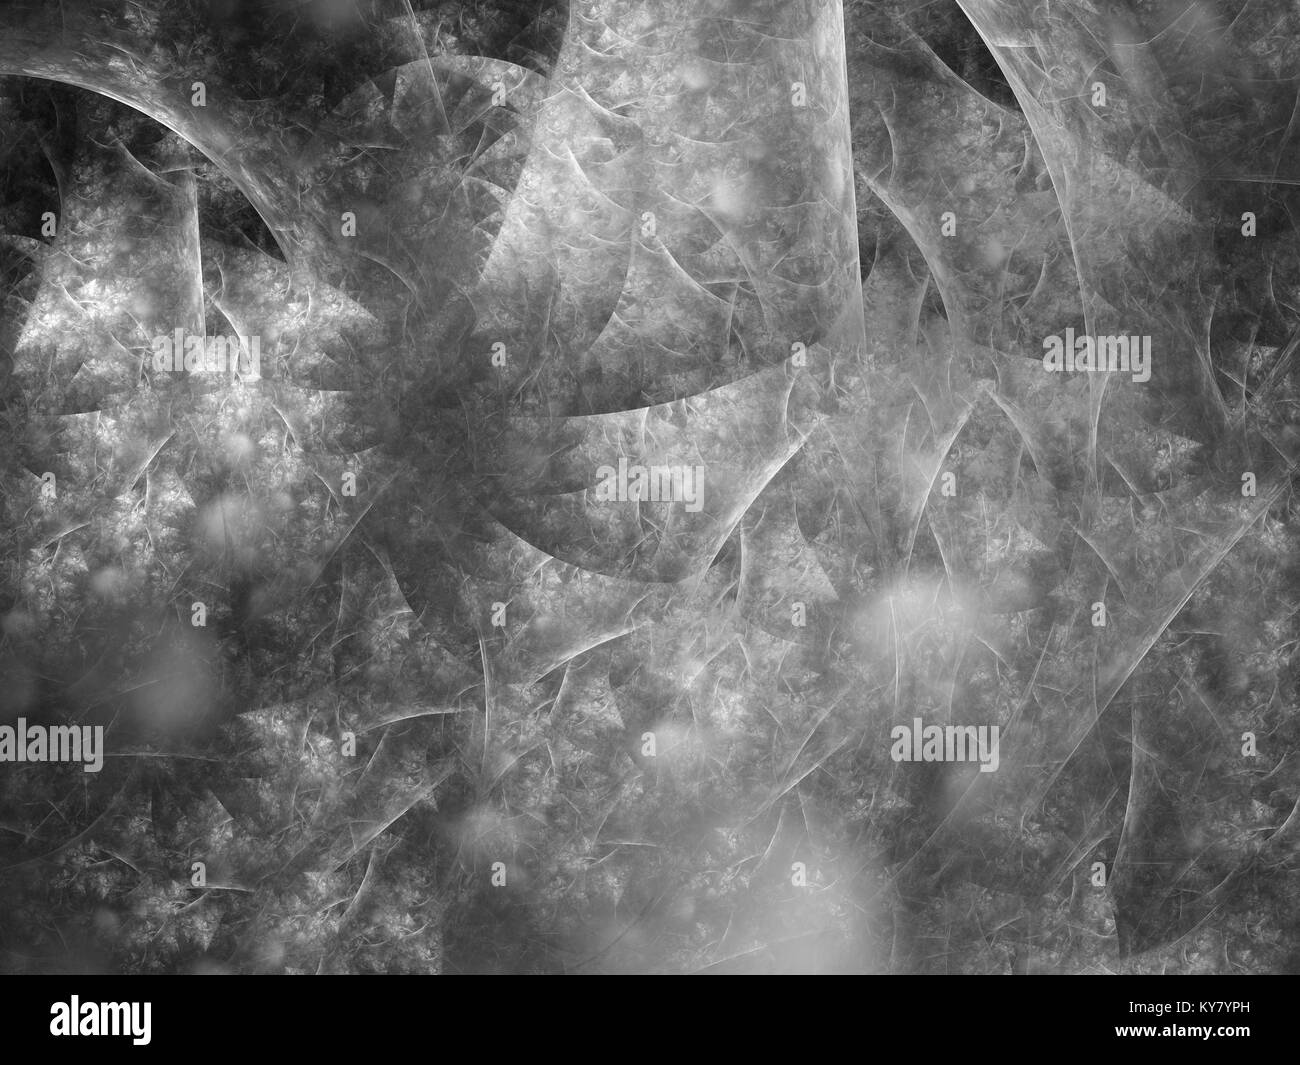 Glowing fractal surfaces, new technology, black and white texture, computer generated abstract background, 3D rendering Stock Photo